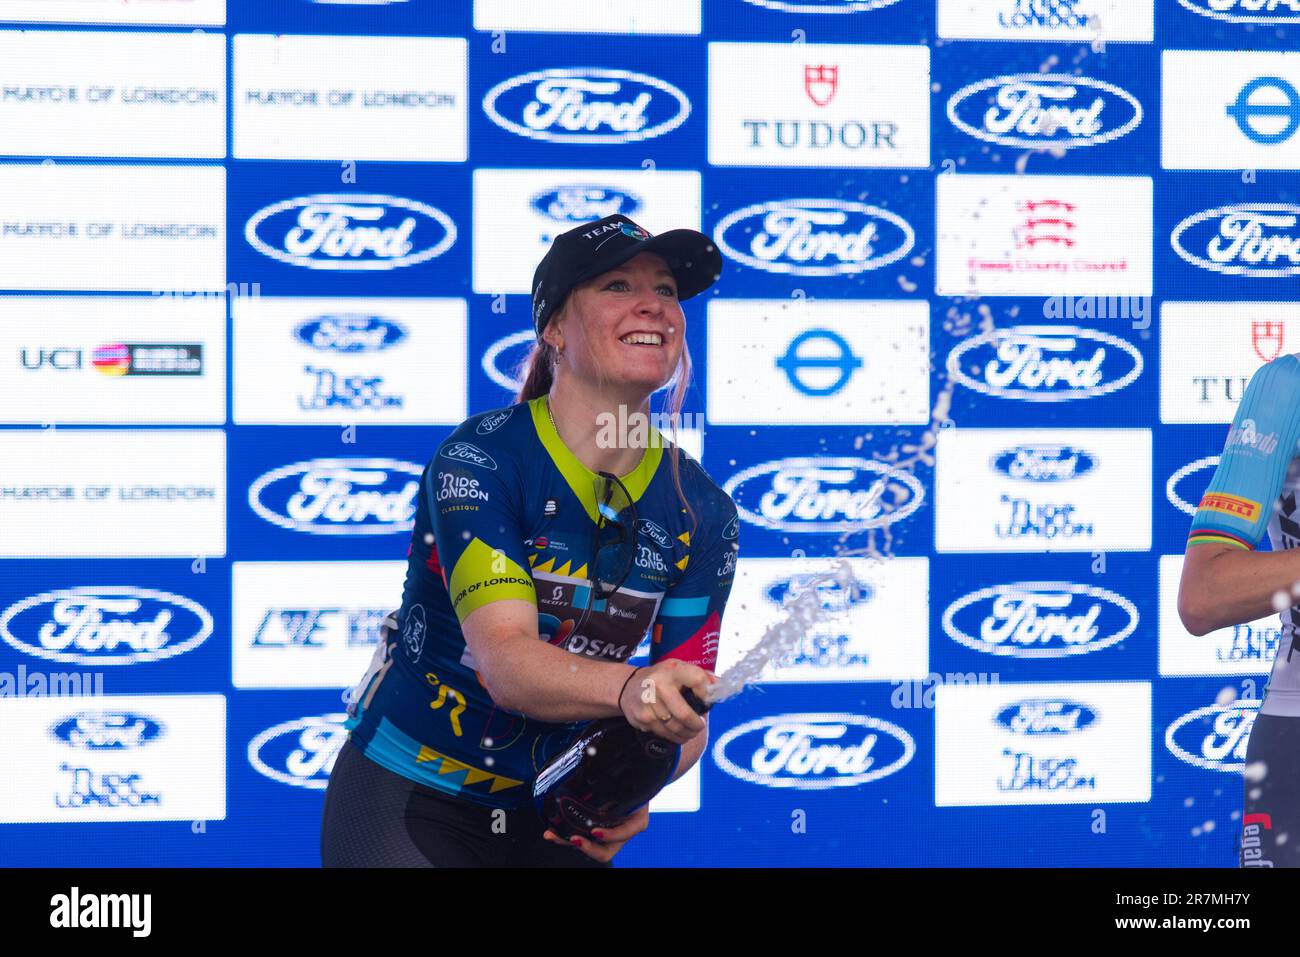 Charlotte Kool spraying champagne after winning the Classique UCI Women's WorldTour road race Stage 3 of the 2023 Ford RideLondon. Team DSM cyclist Stock Photo